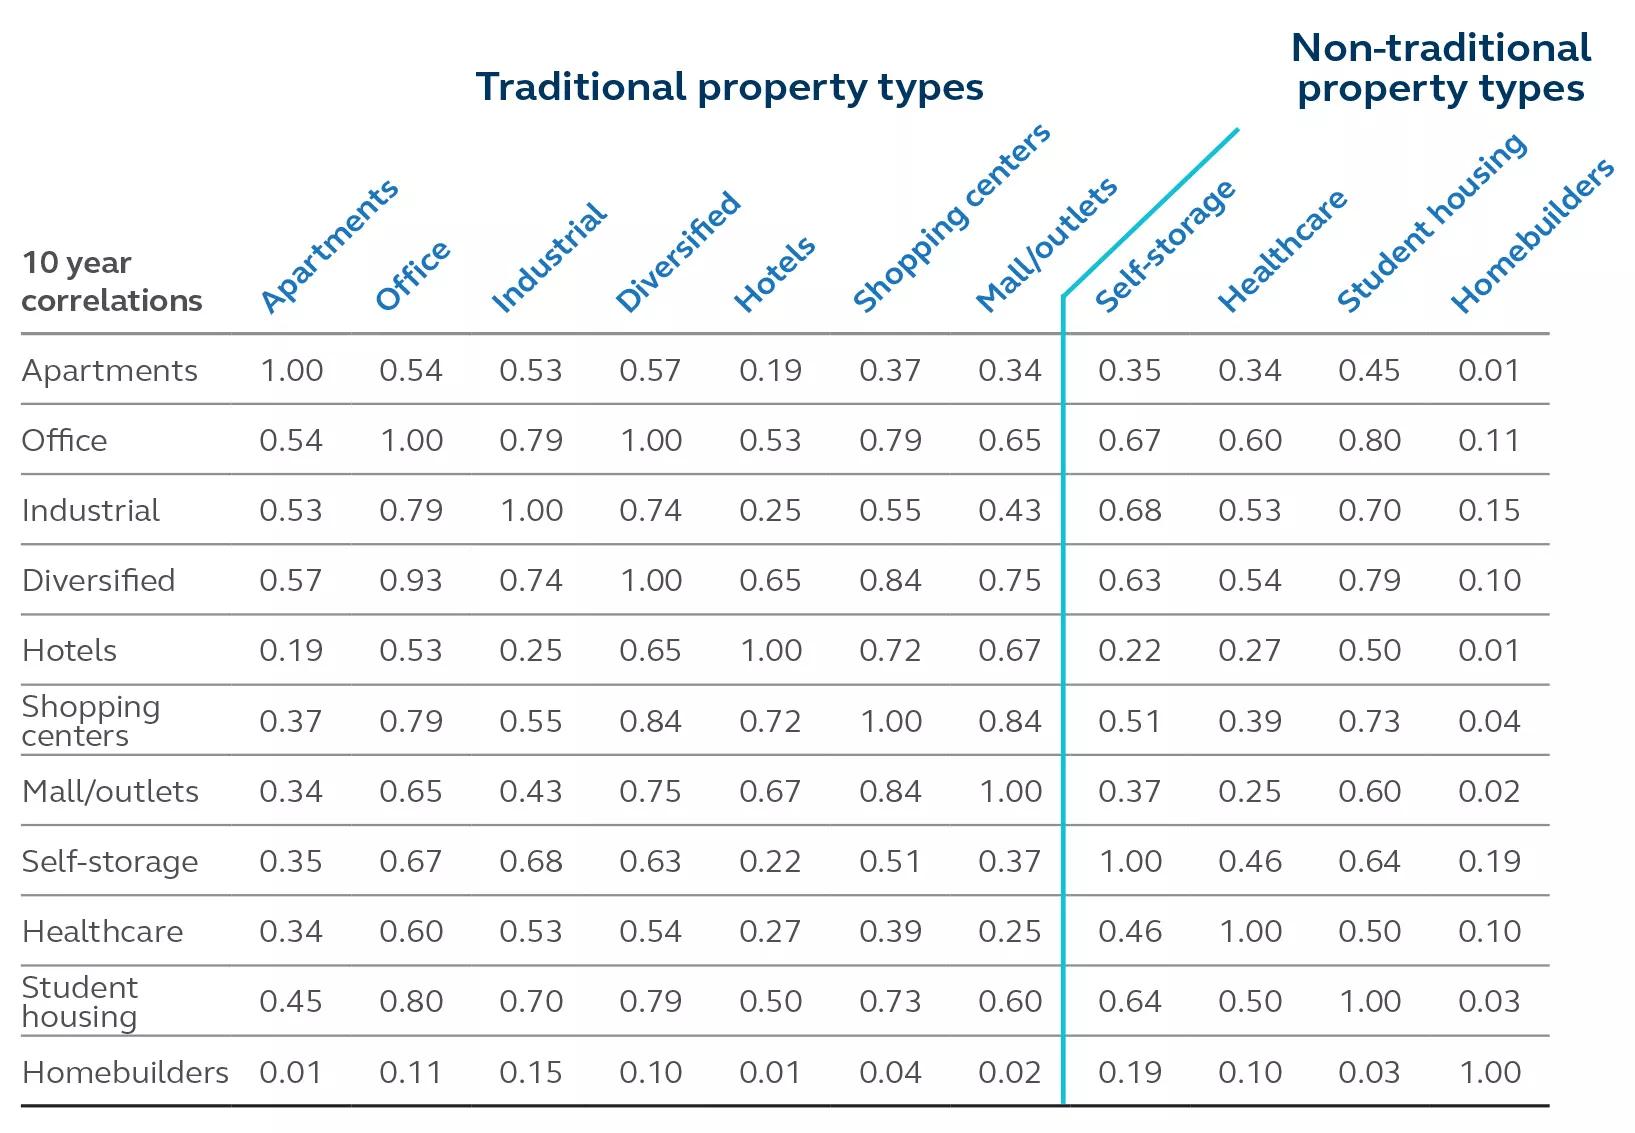 Table showing traditional and non-traditional property types in 10 year correlations as of September 2021